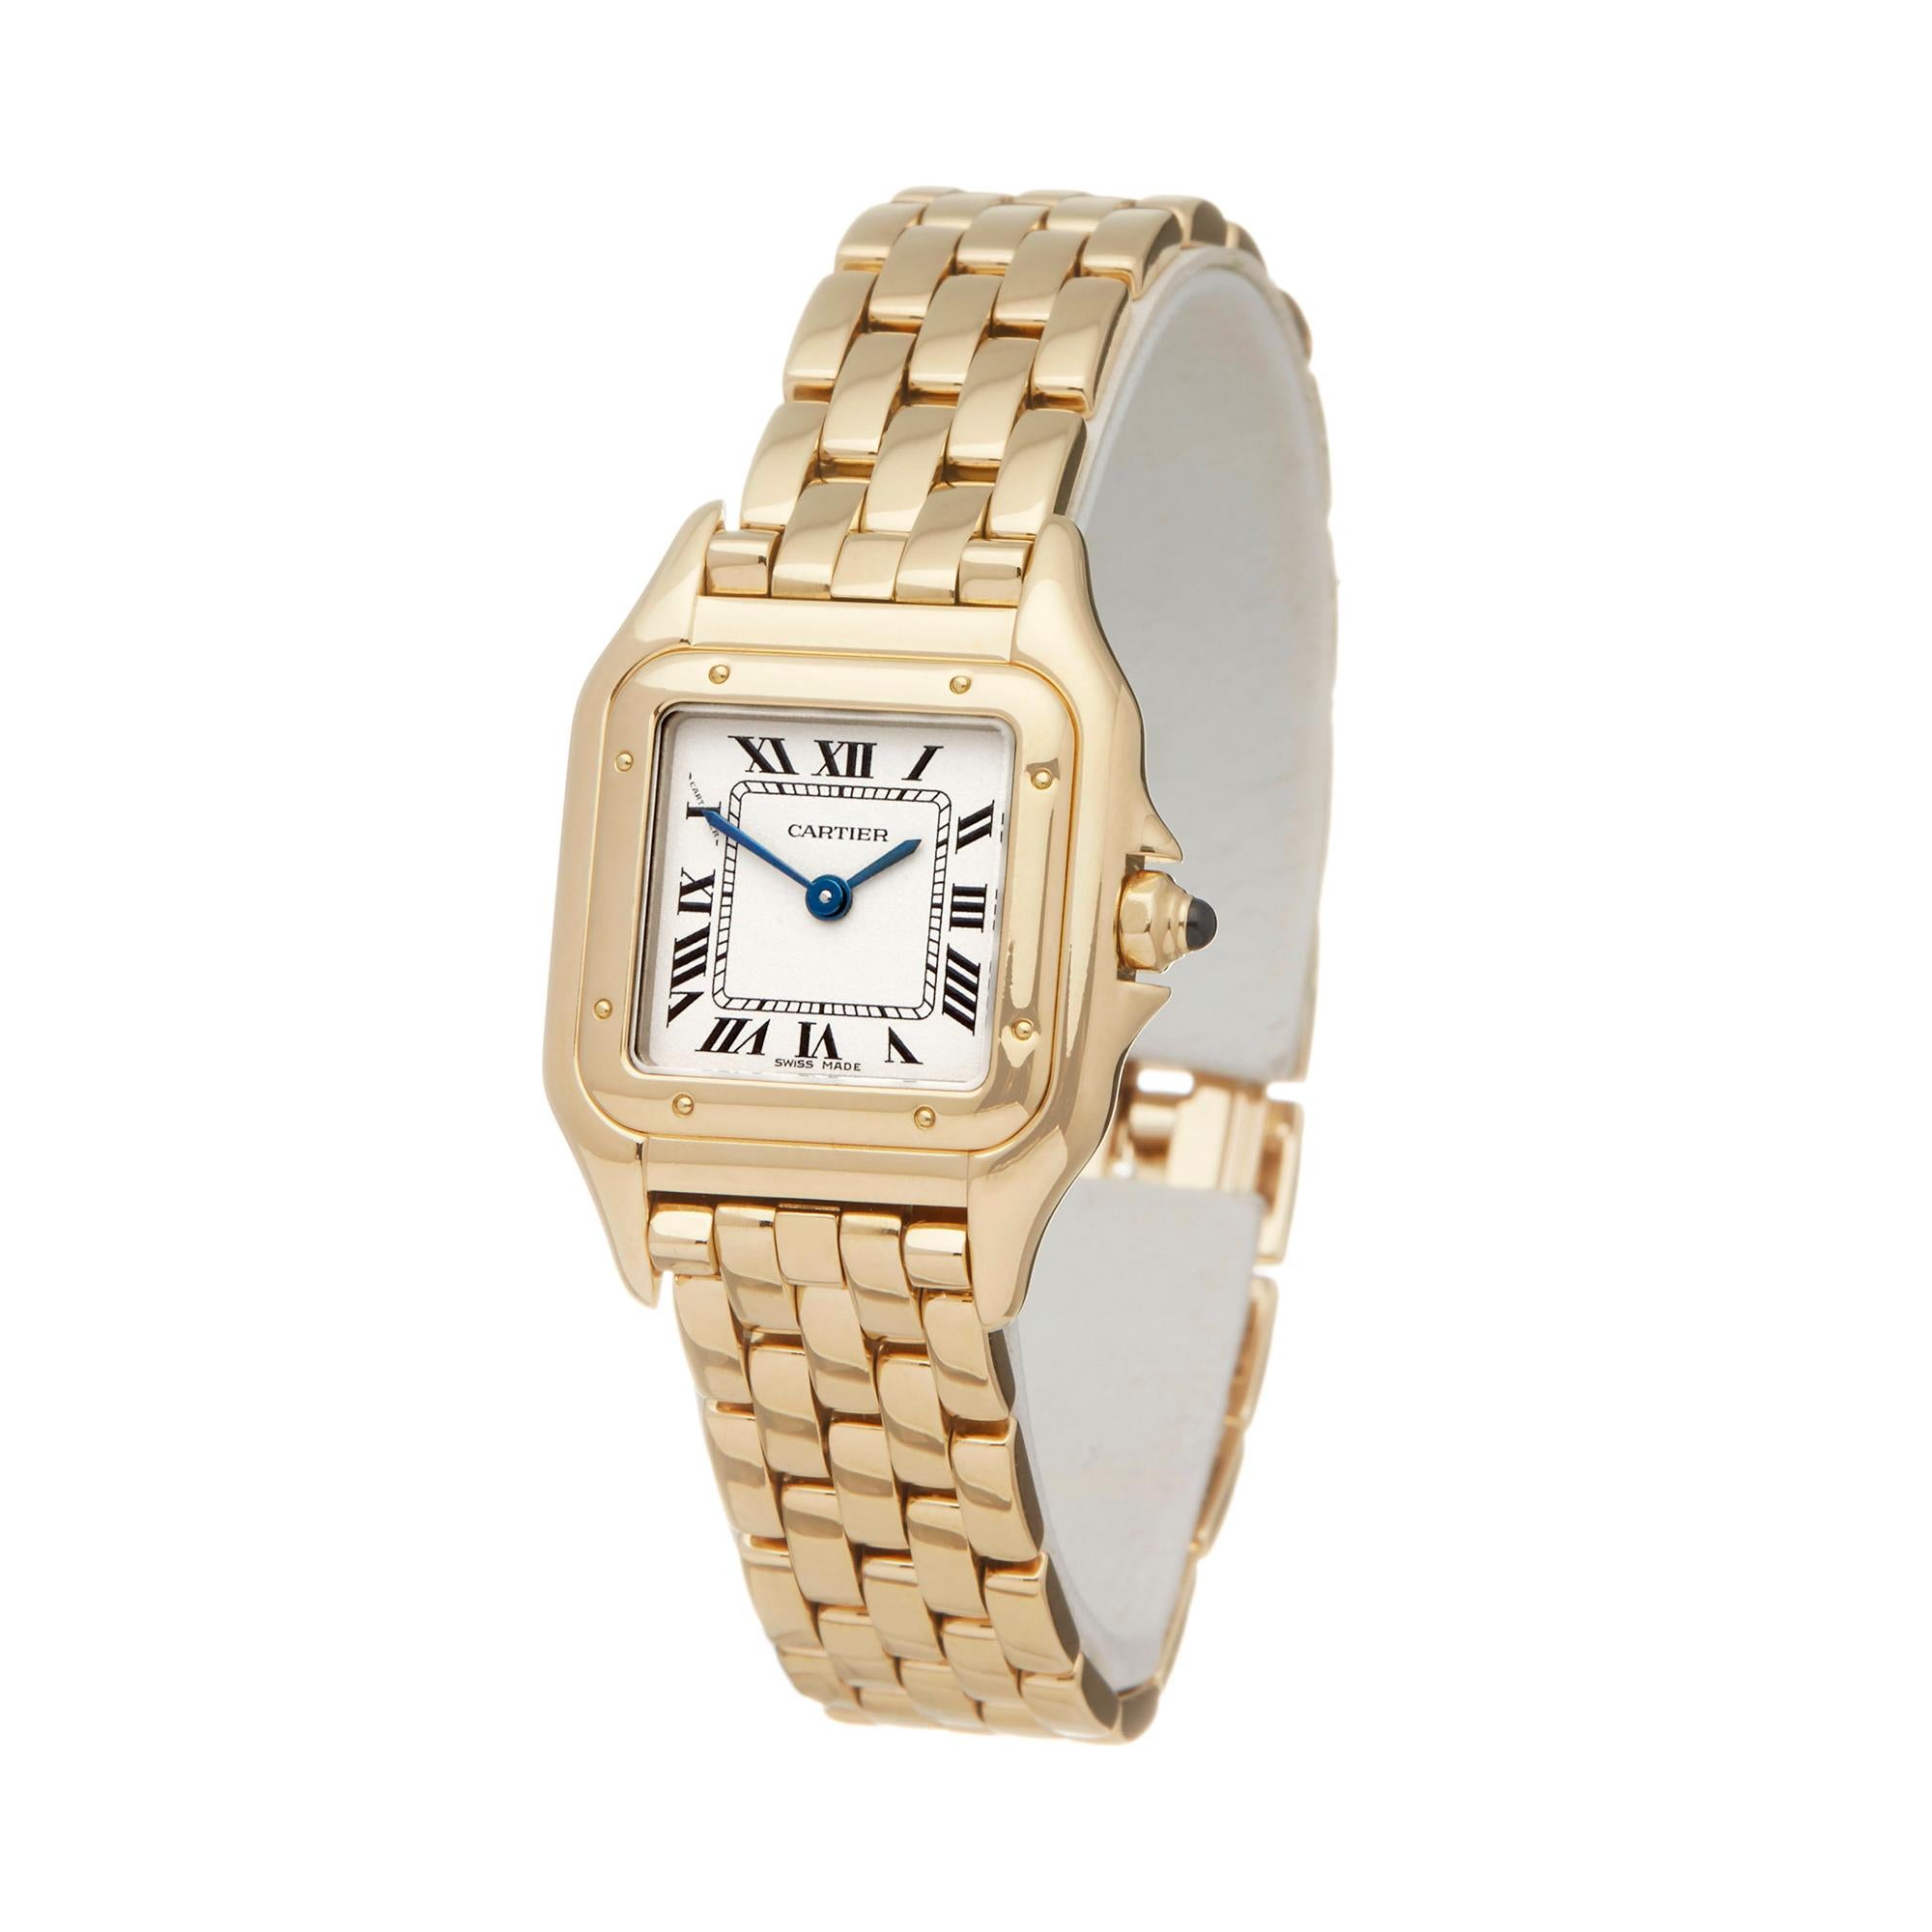 Ref: W5998
Manufacturer: Cartier
Model: Panthère de Cartier
Model Ref: W25022B9 or 1070
Age: Circa 1990's
Gender: Ladies
Complete With: Box Only
Dial: White Roman 
Glass: Sapphire Crystal
Movement: Quartz
Water Resistance: To Manufacturers